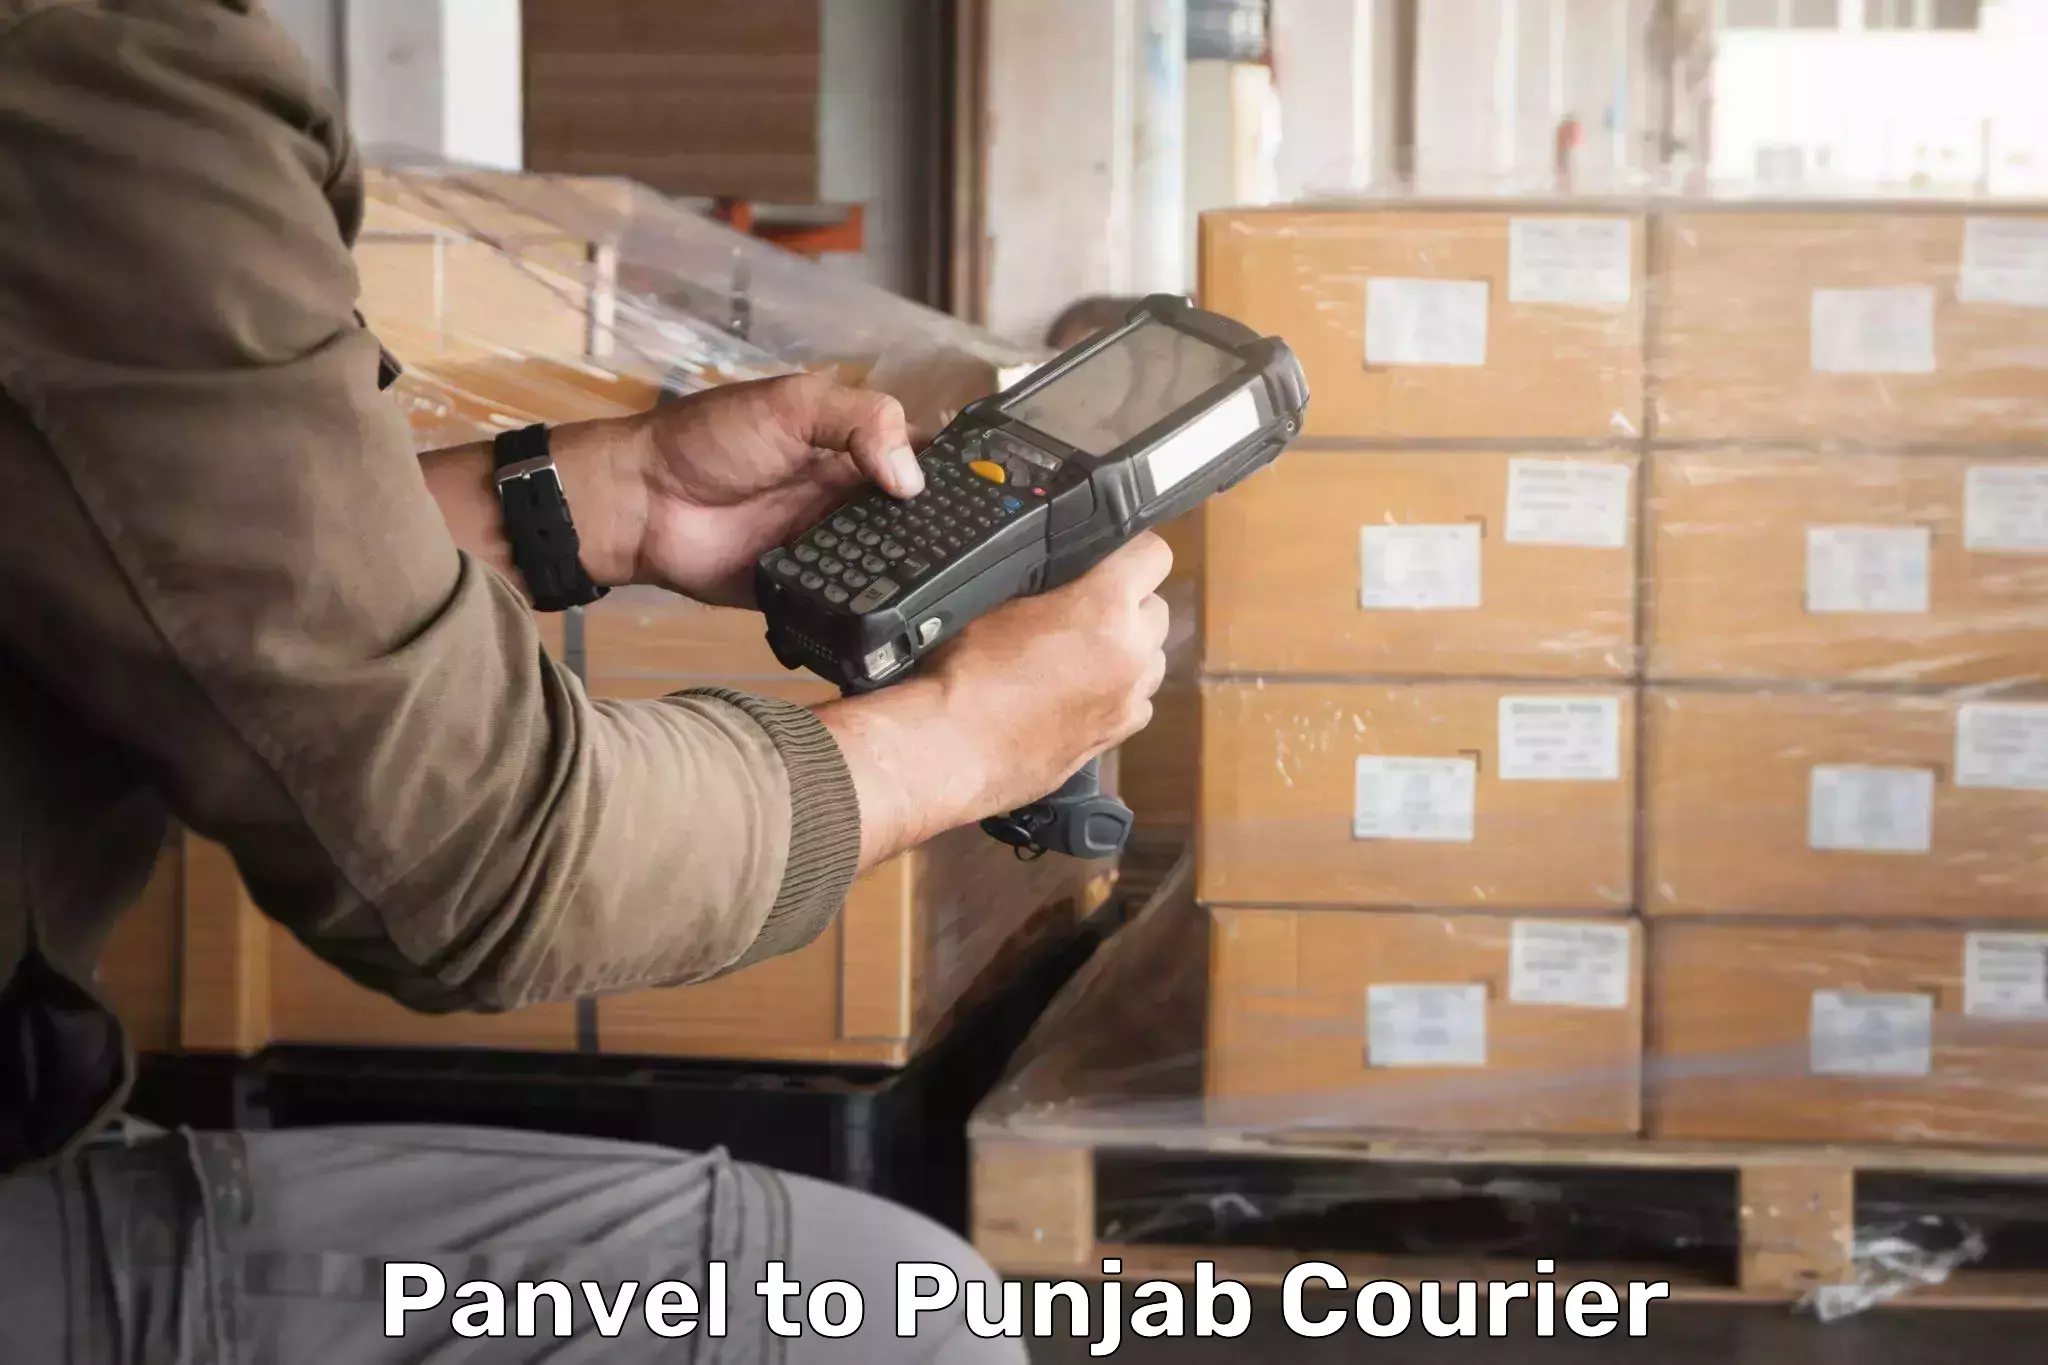 Package delivery network Panvel to Kapurthala